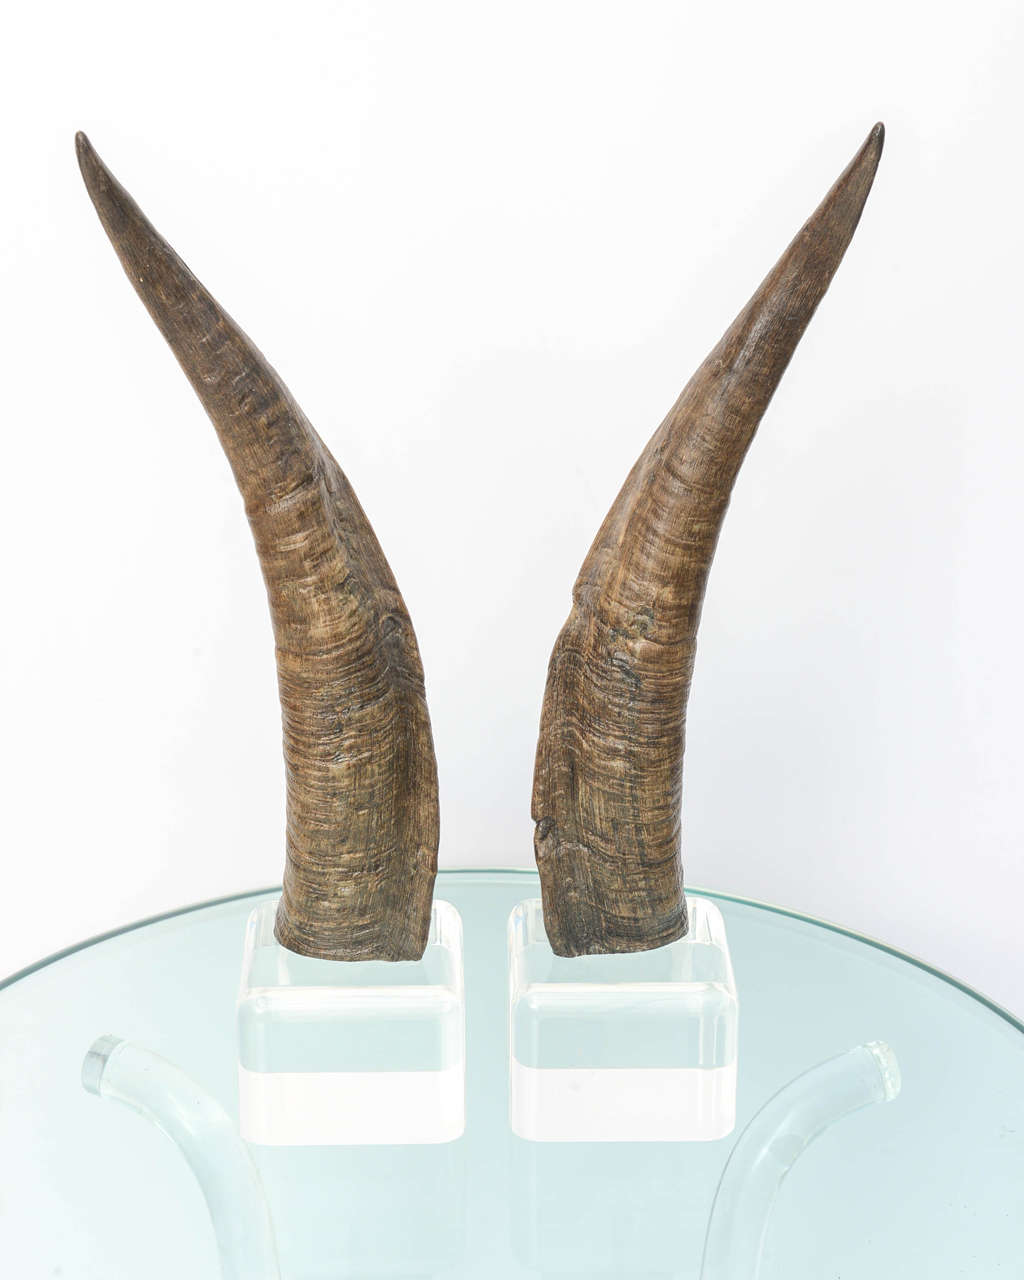  Pair of horns mounted on a Lucite base. 

Note: Overall height of one is 15.50